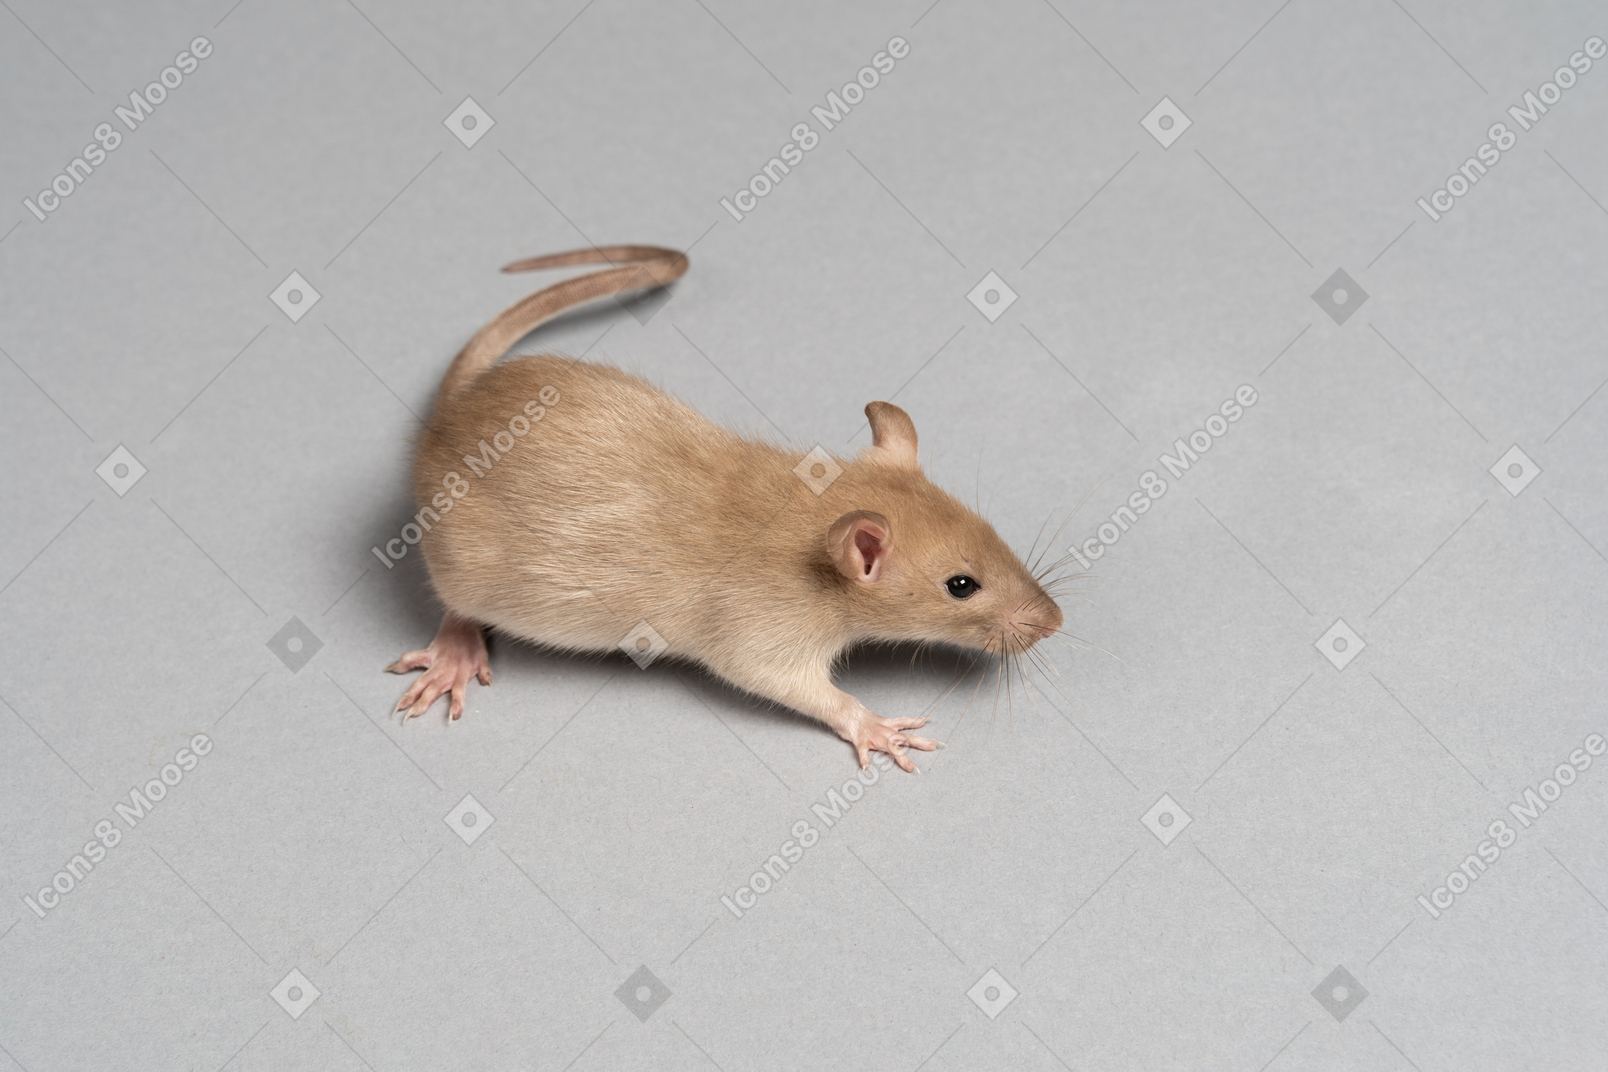 One brown mouse on grey background